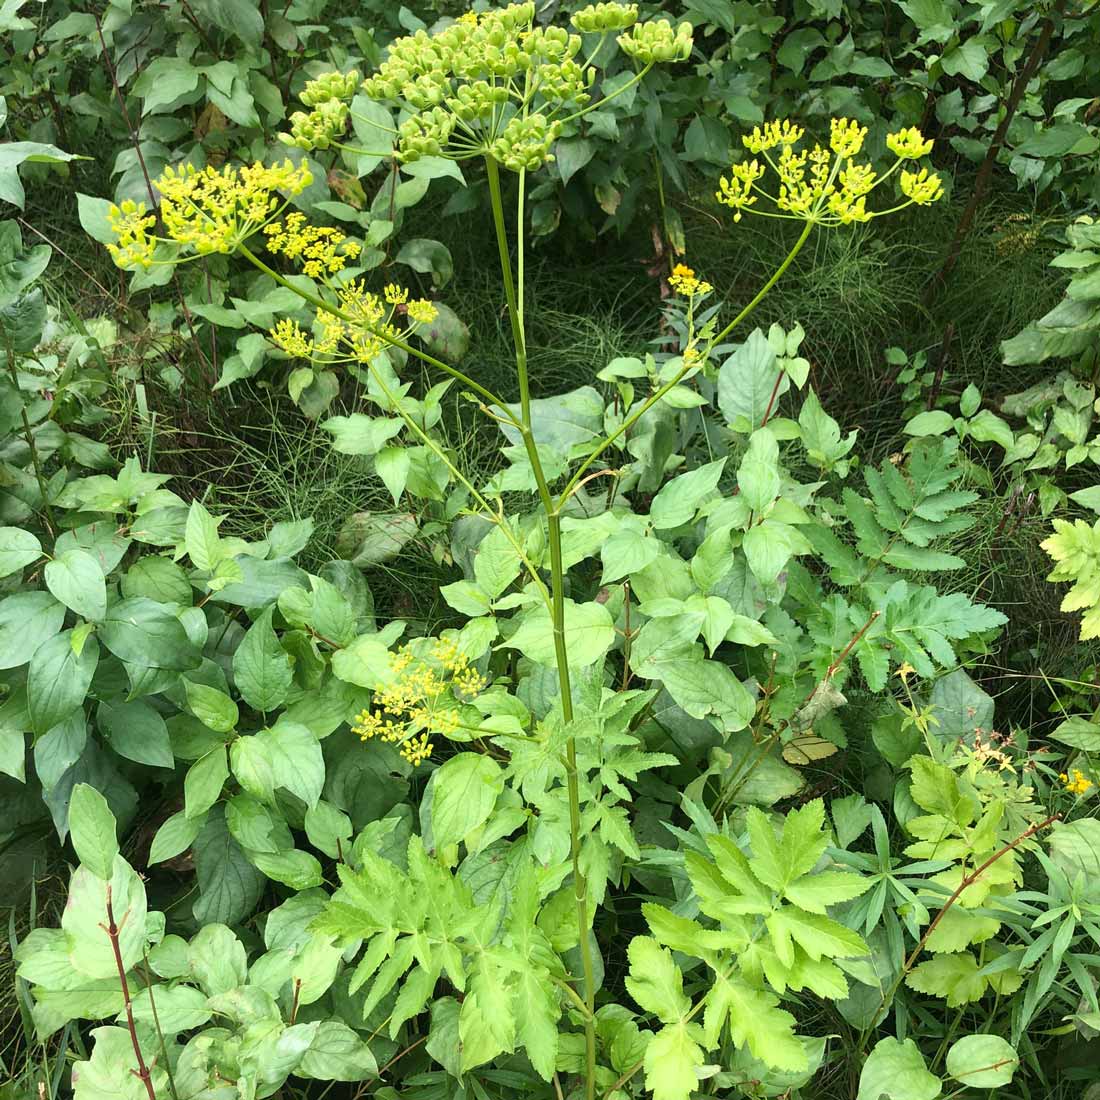 Wild parsnip with yellow flowers.  iNaturalist